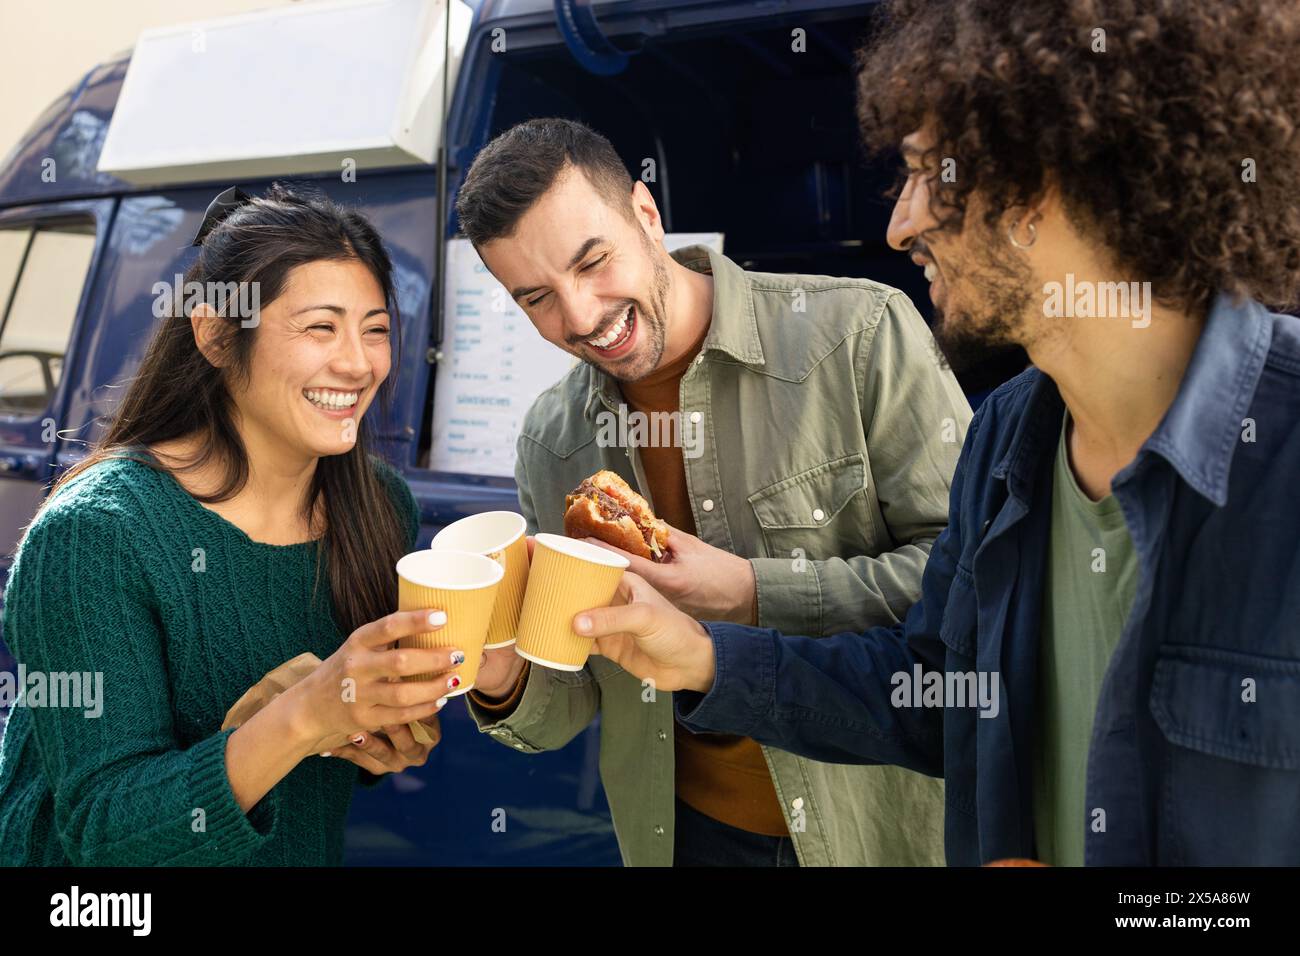 Three friends share a joyful moment over snacks from a food truck Stock Photo